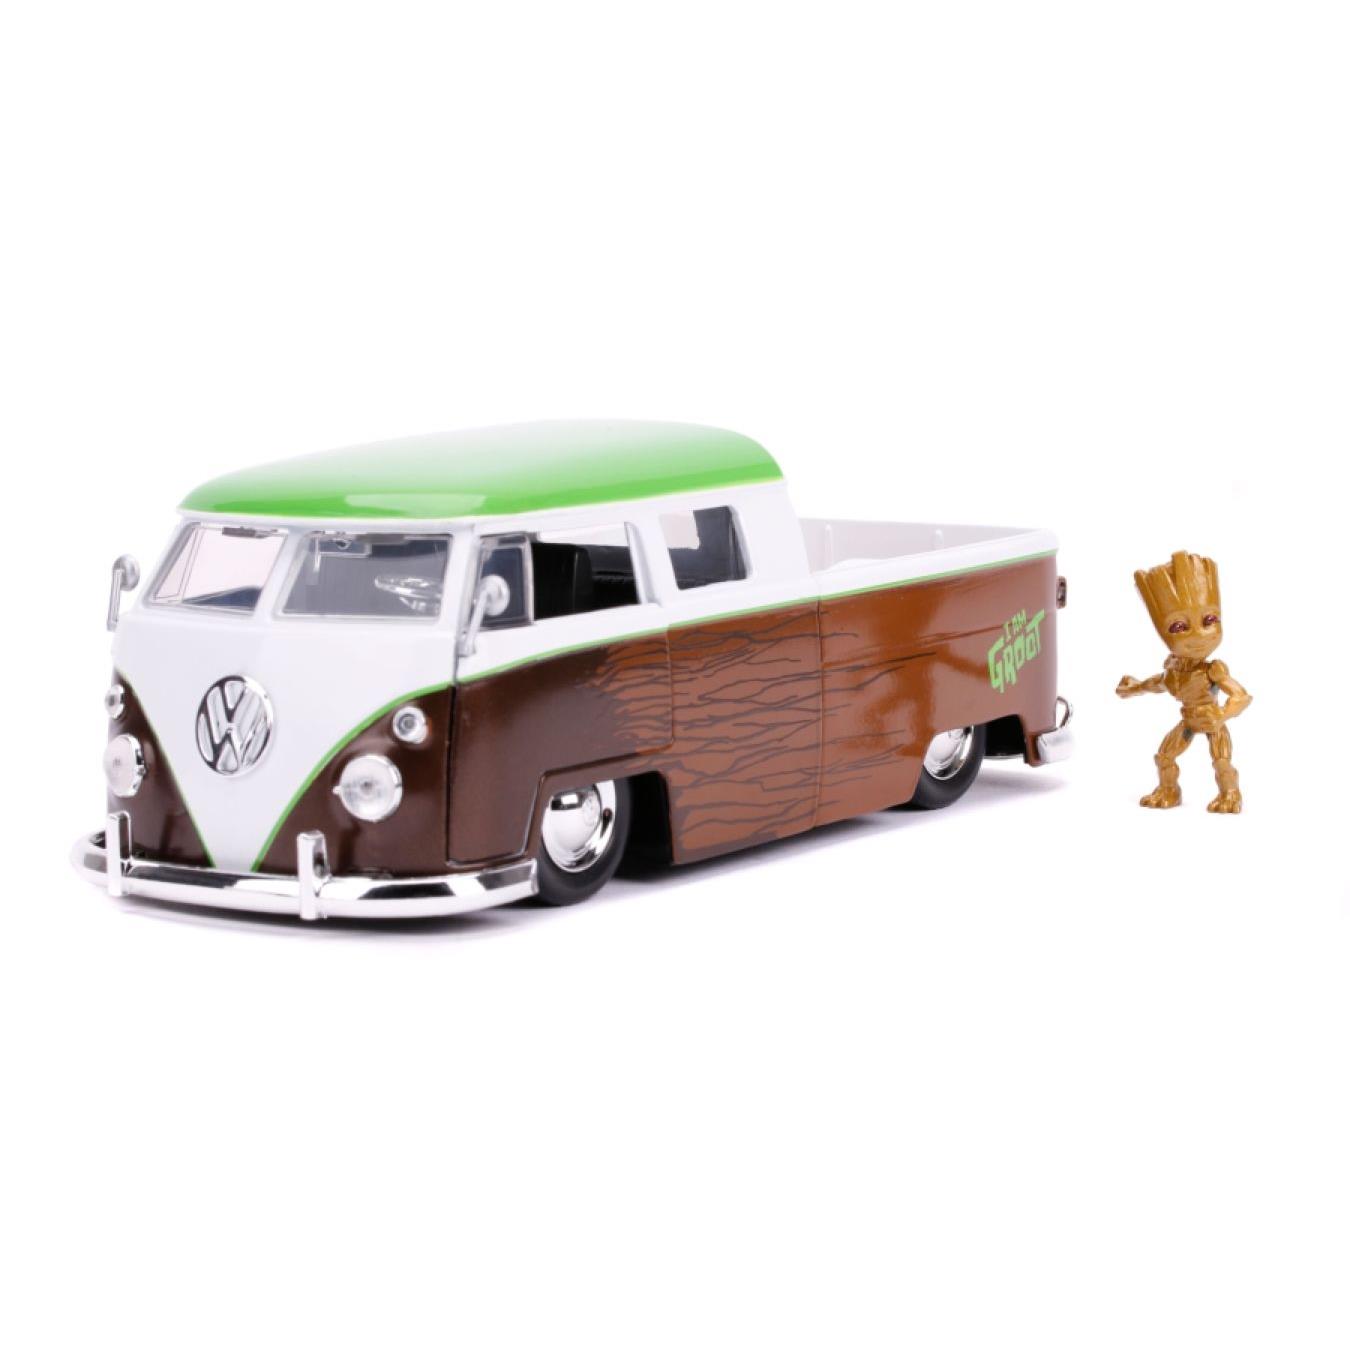 guardians of the galaxy - 1963 volkswagen bus with groot 1:24 scale hollywood ride vehicle replica